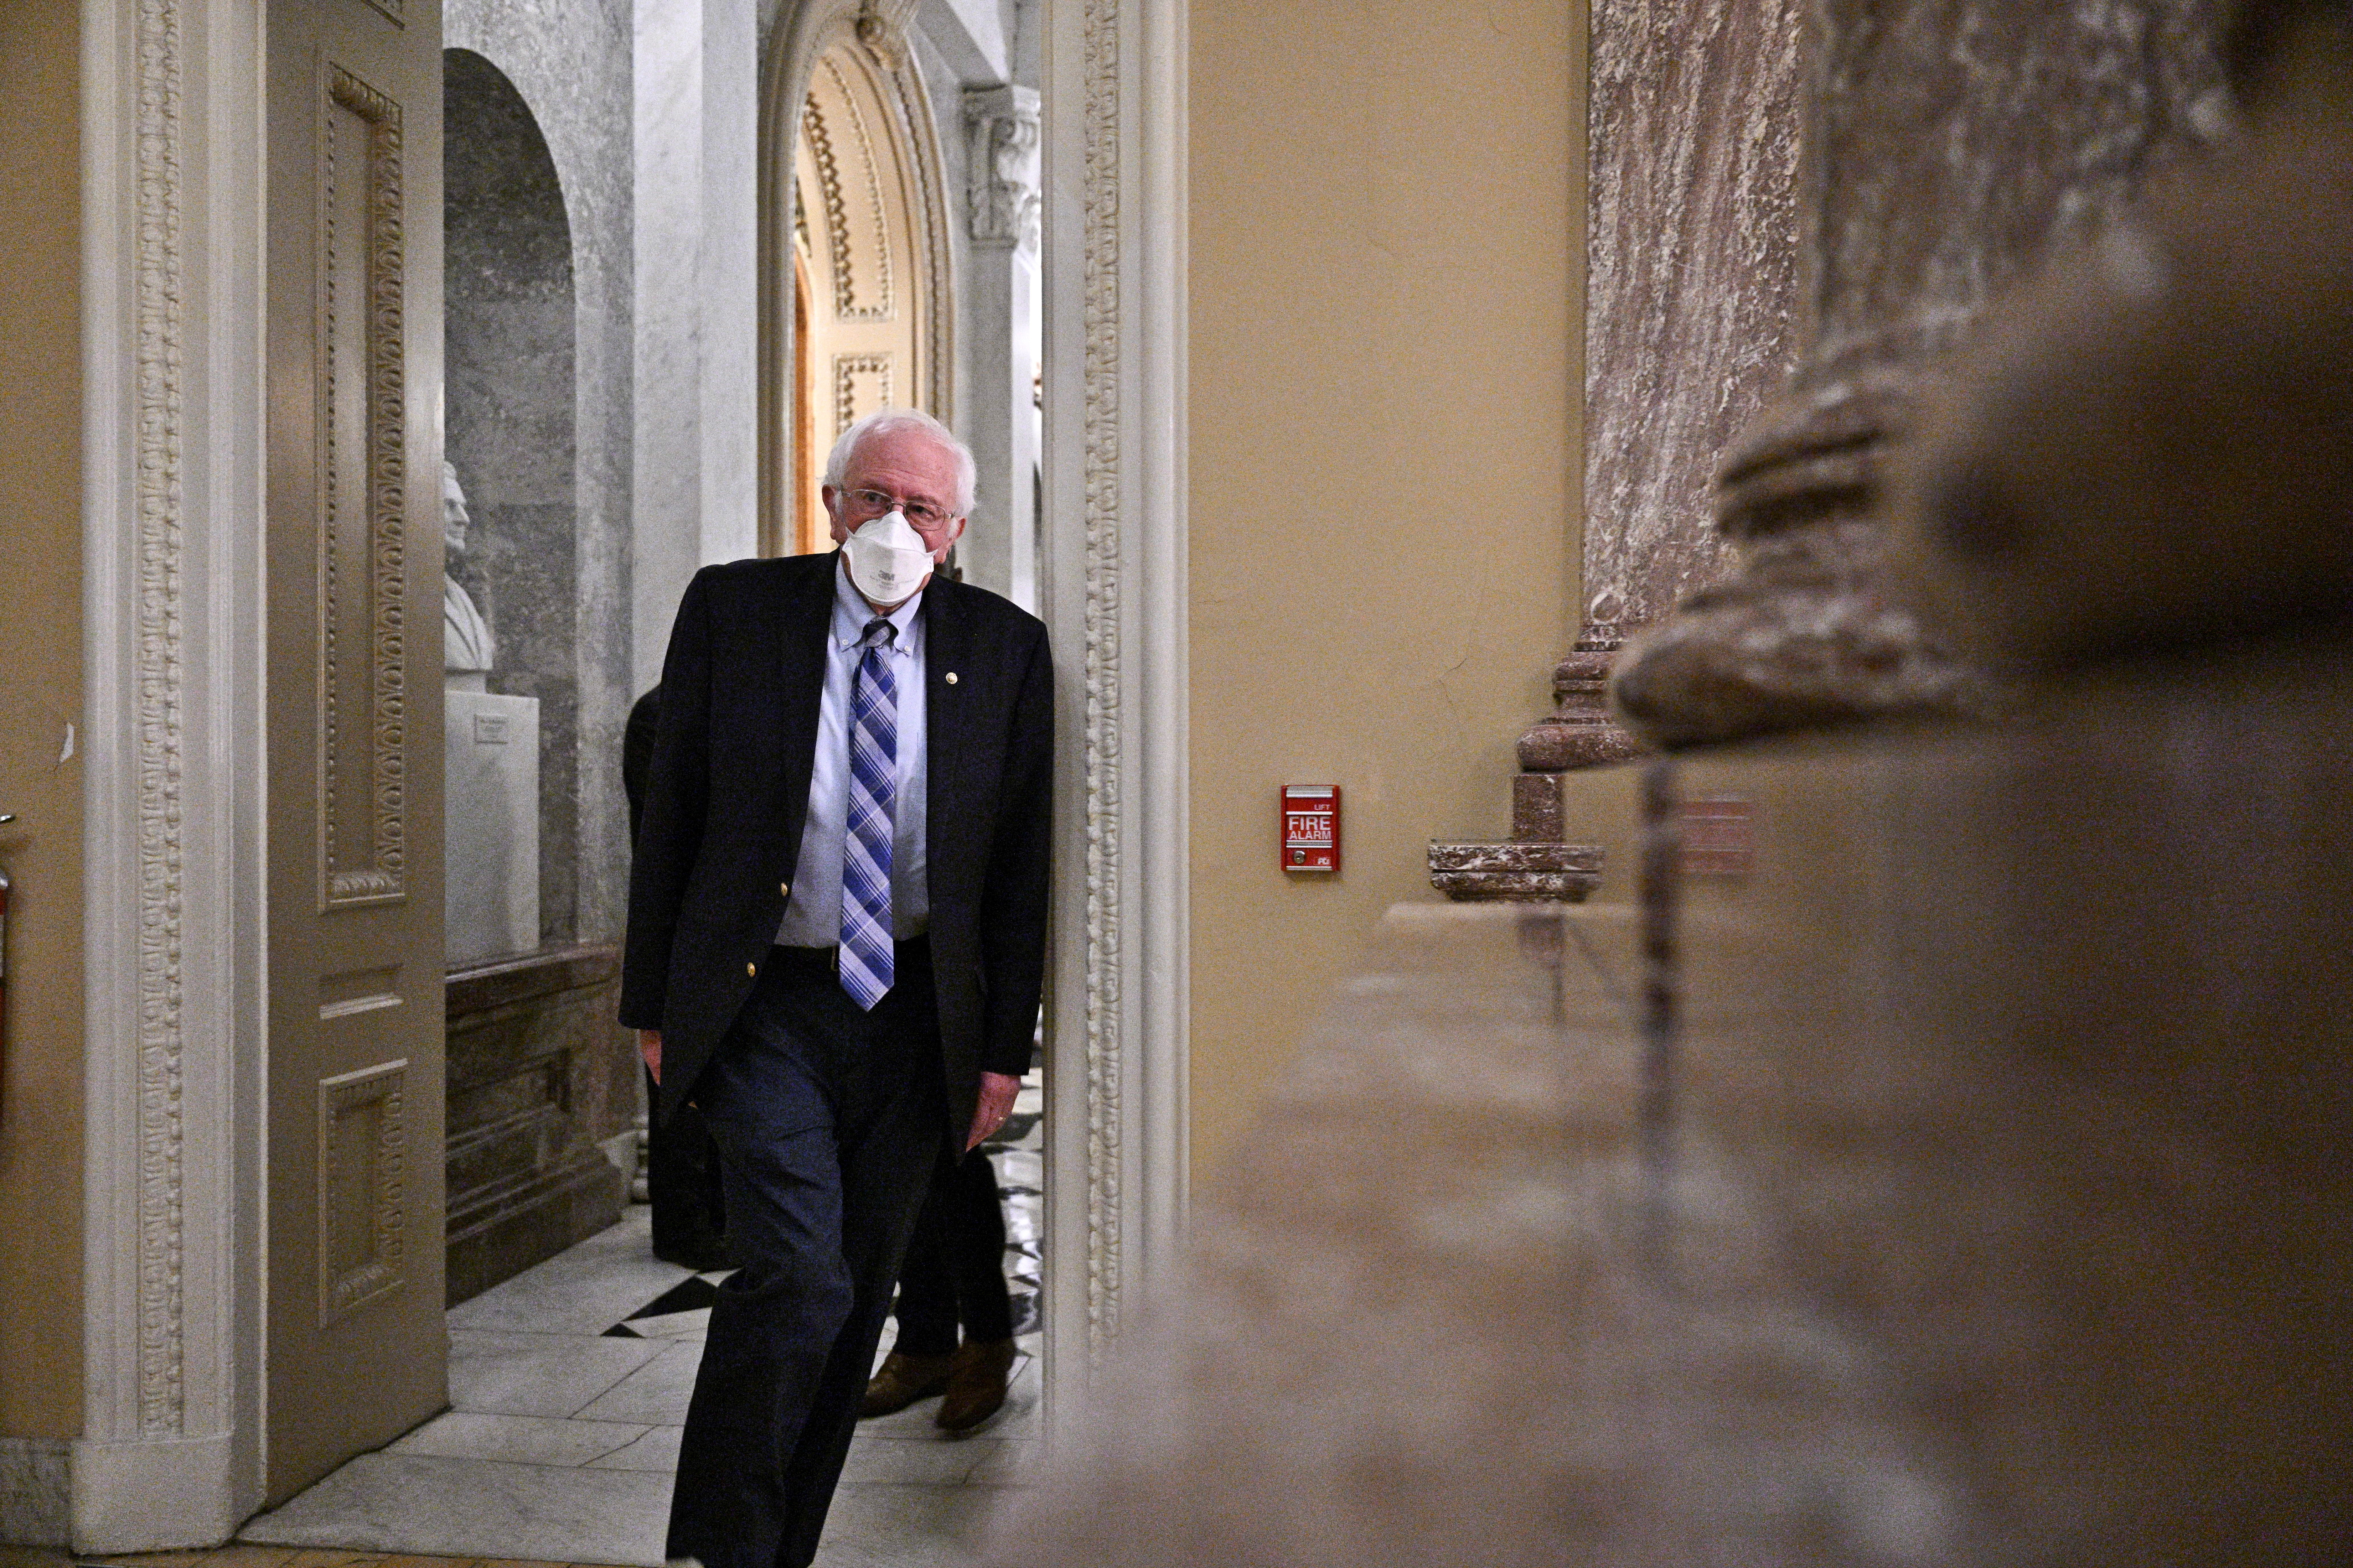 U.S. Senator Bernie Sanders (I-VT) leaves after voting on an amendment to the Continuing Resolution that averted a shutdown of the federal government, at the U.S. Capitol in Washington